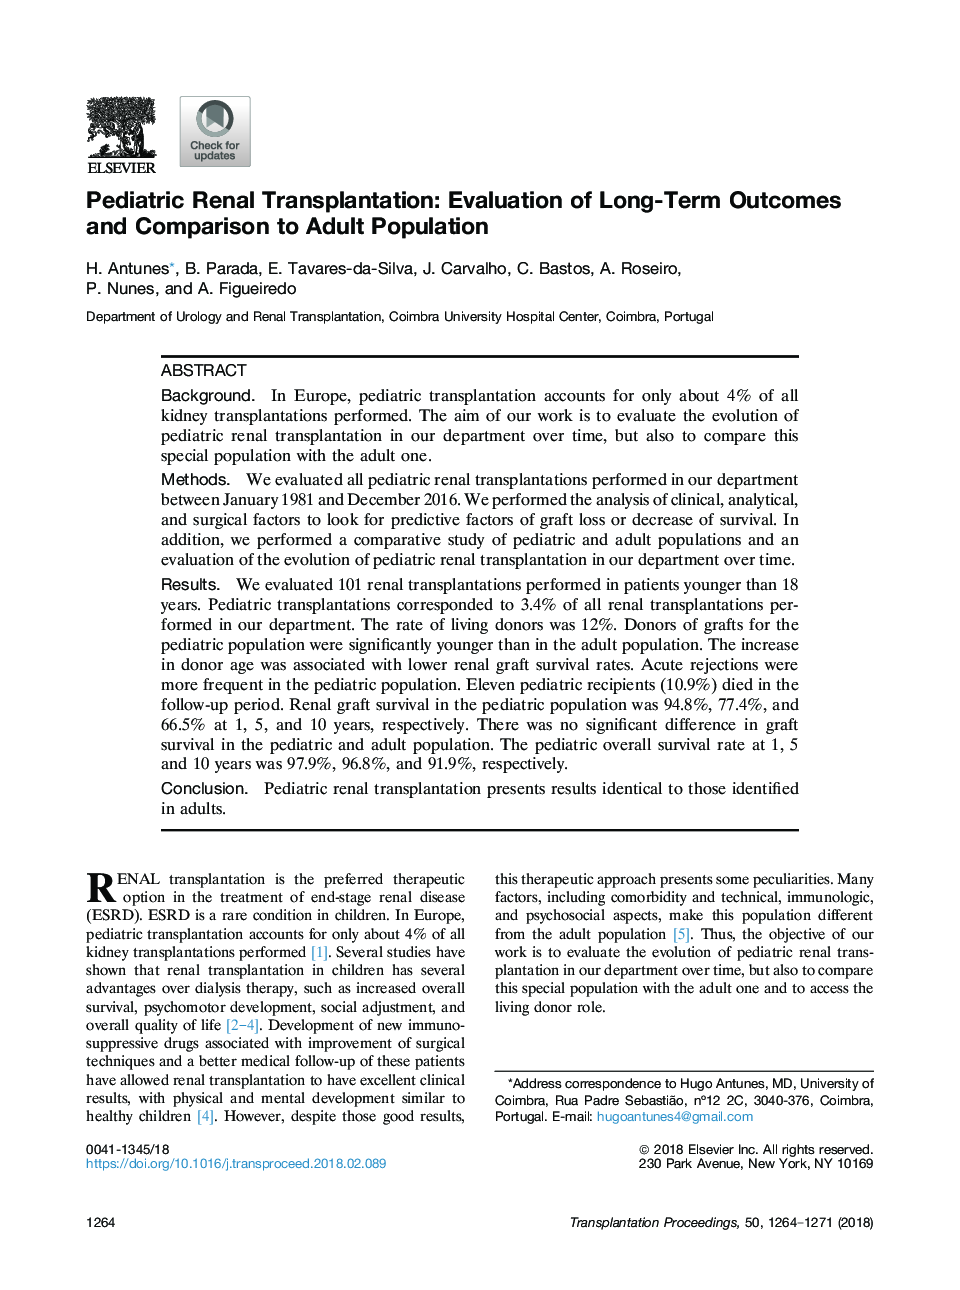 Pediatric Renal Transplantation: Evaluation of Long-Term Outcomes and Comparison to Adult Population